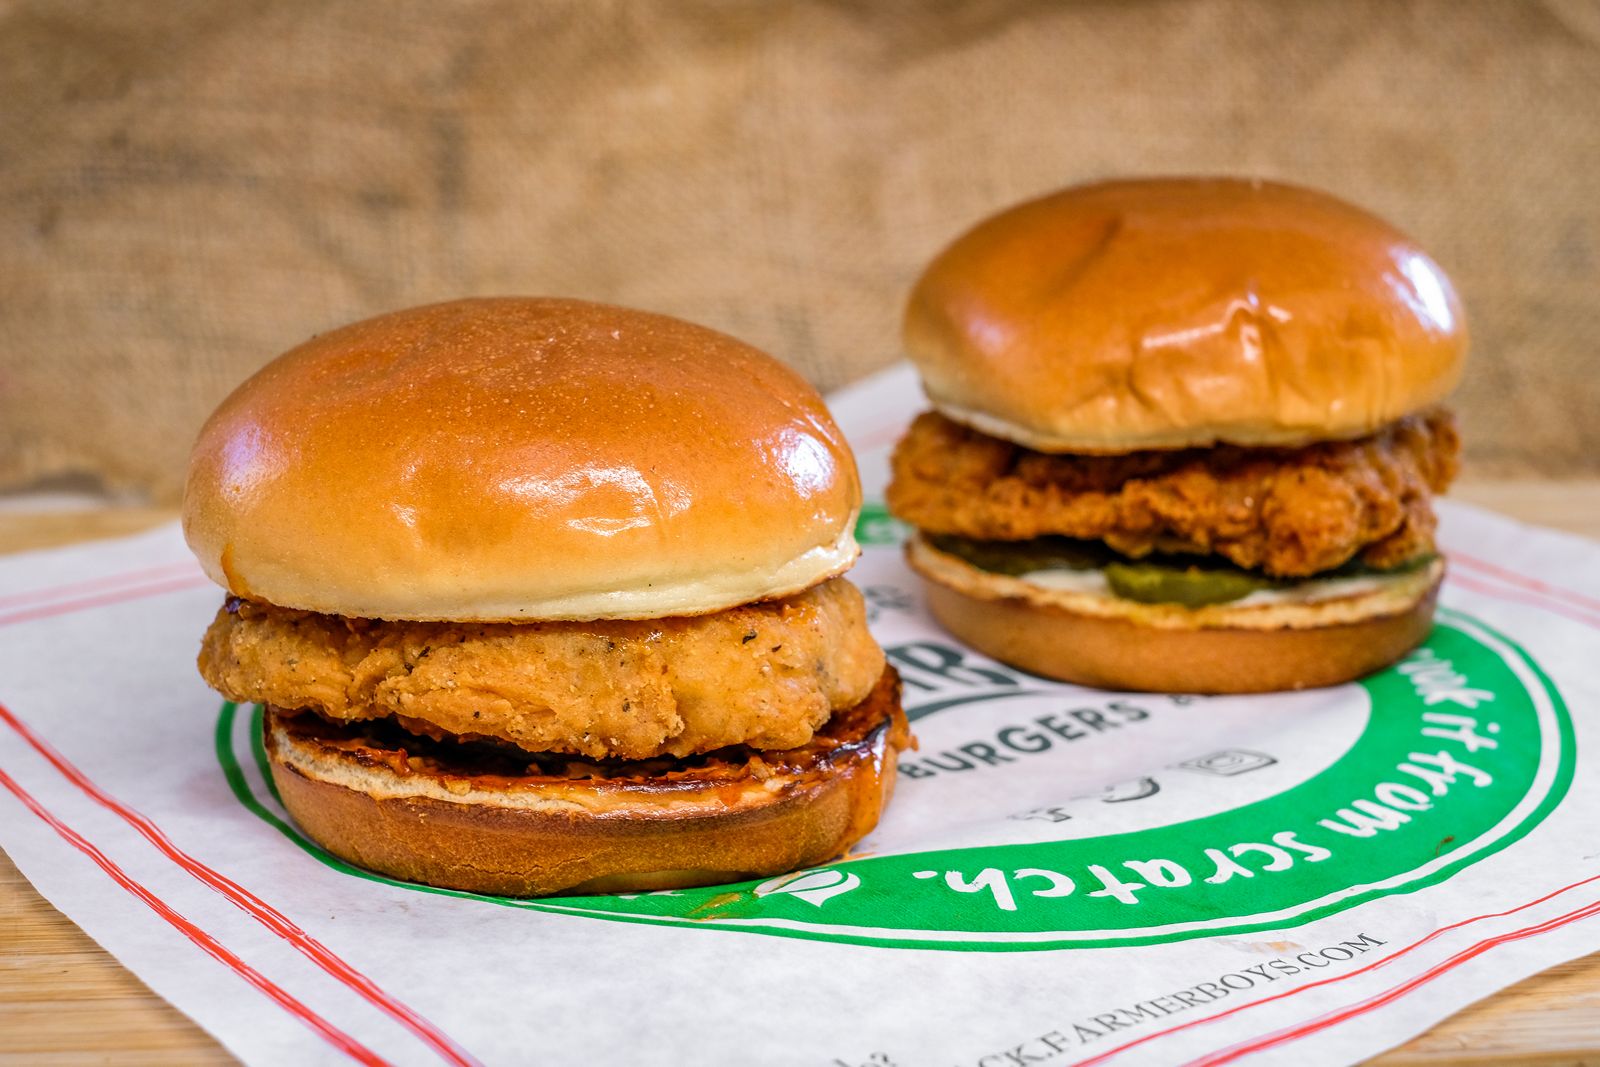 Farmer Boys Announces Permanent Addition of Fried Chicken Sandwiches to Menu